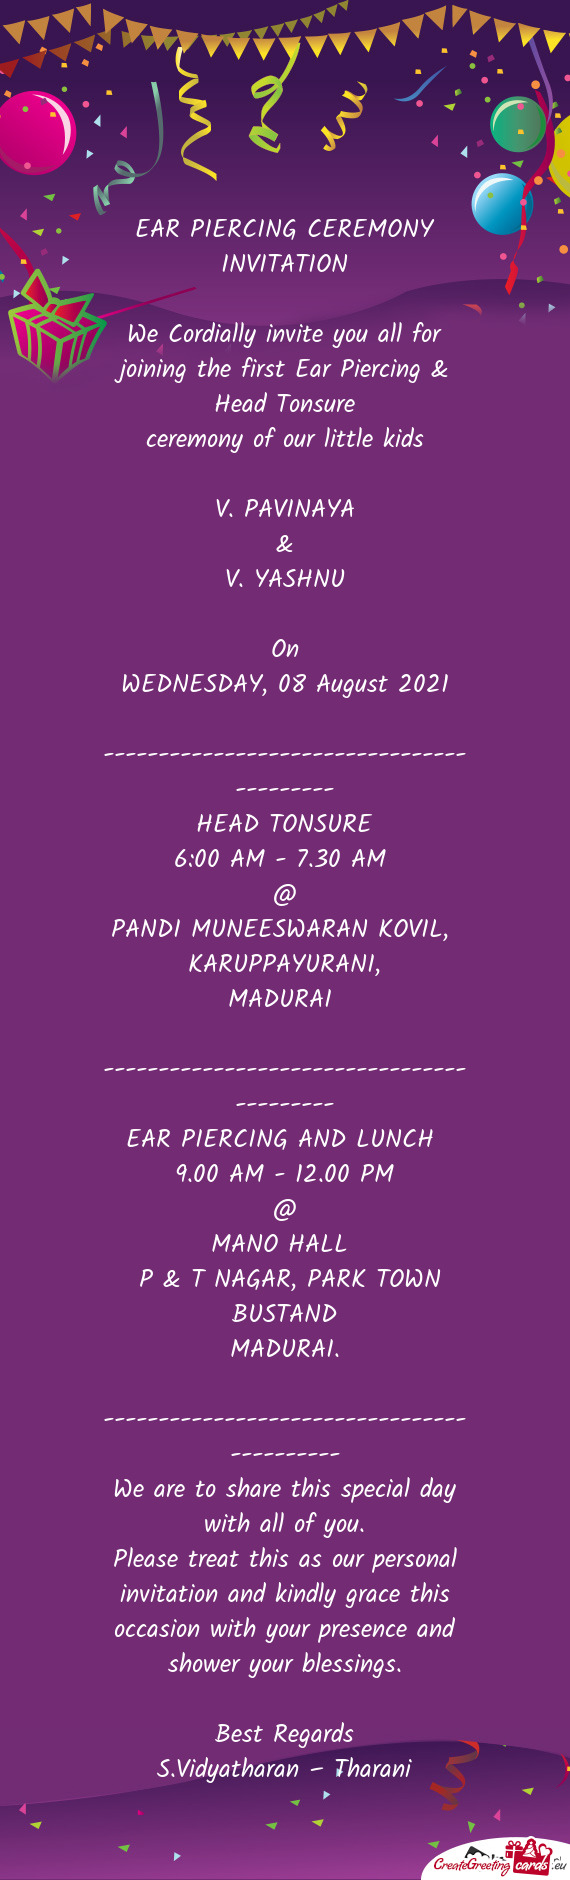 We Cordially invite you all for joining the first Ear Piercing & Head Tonsure